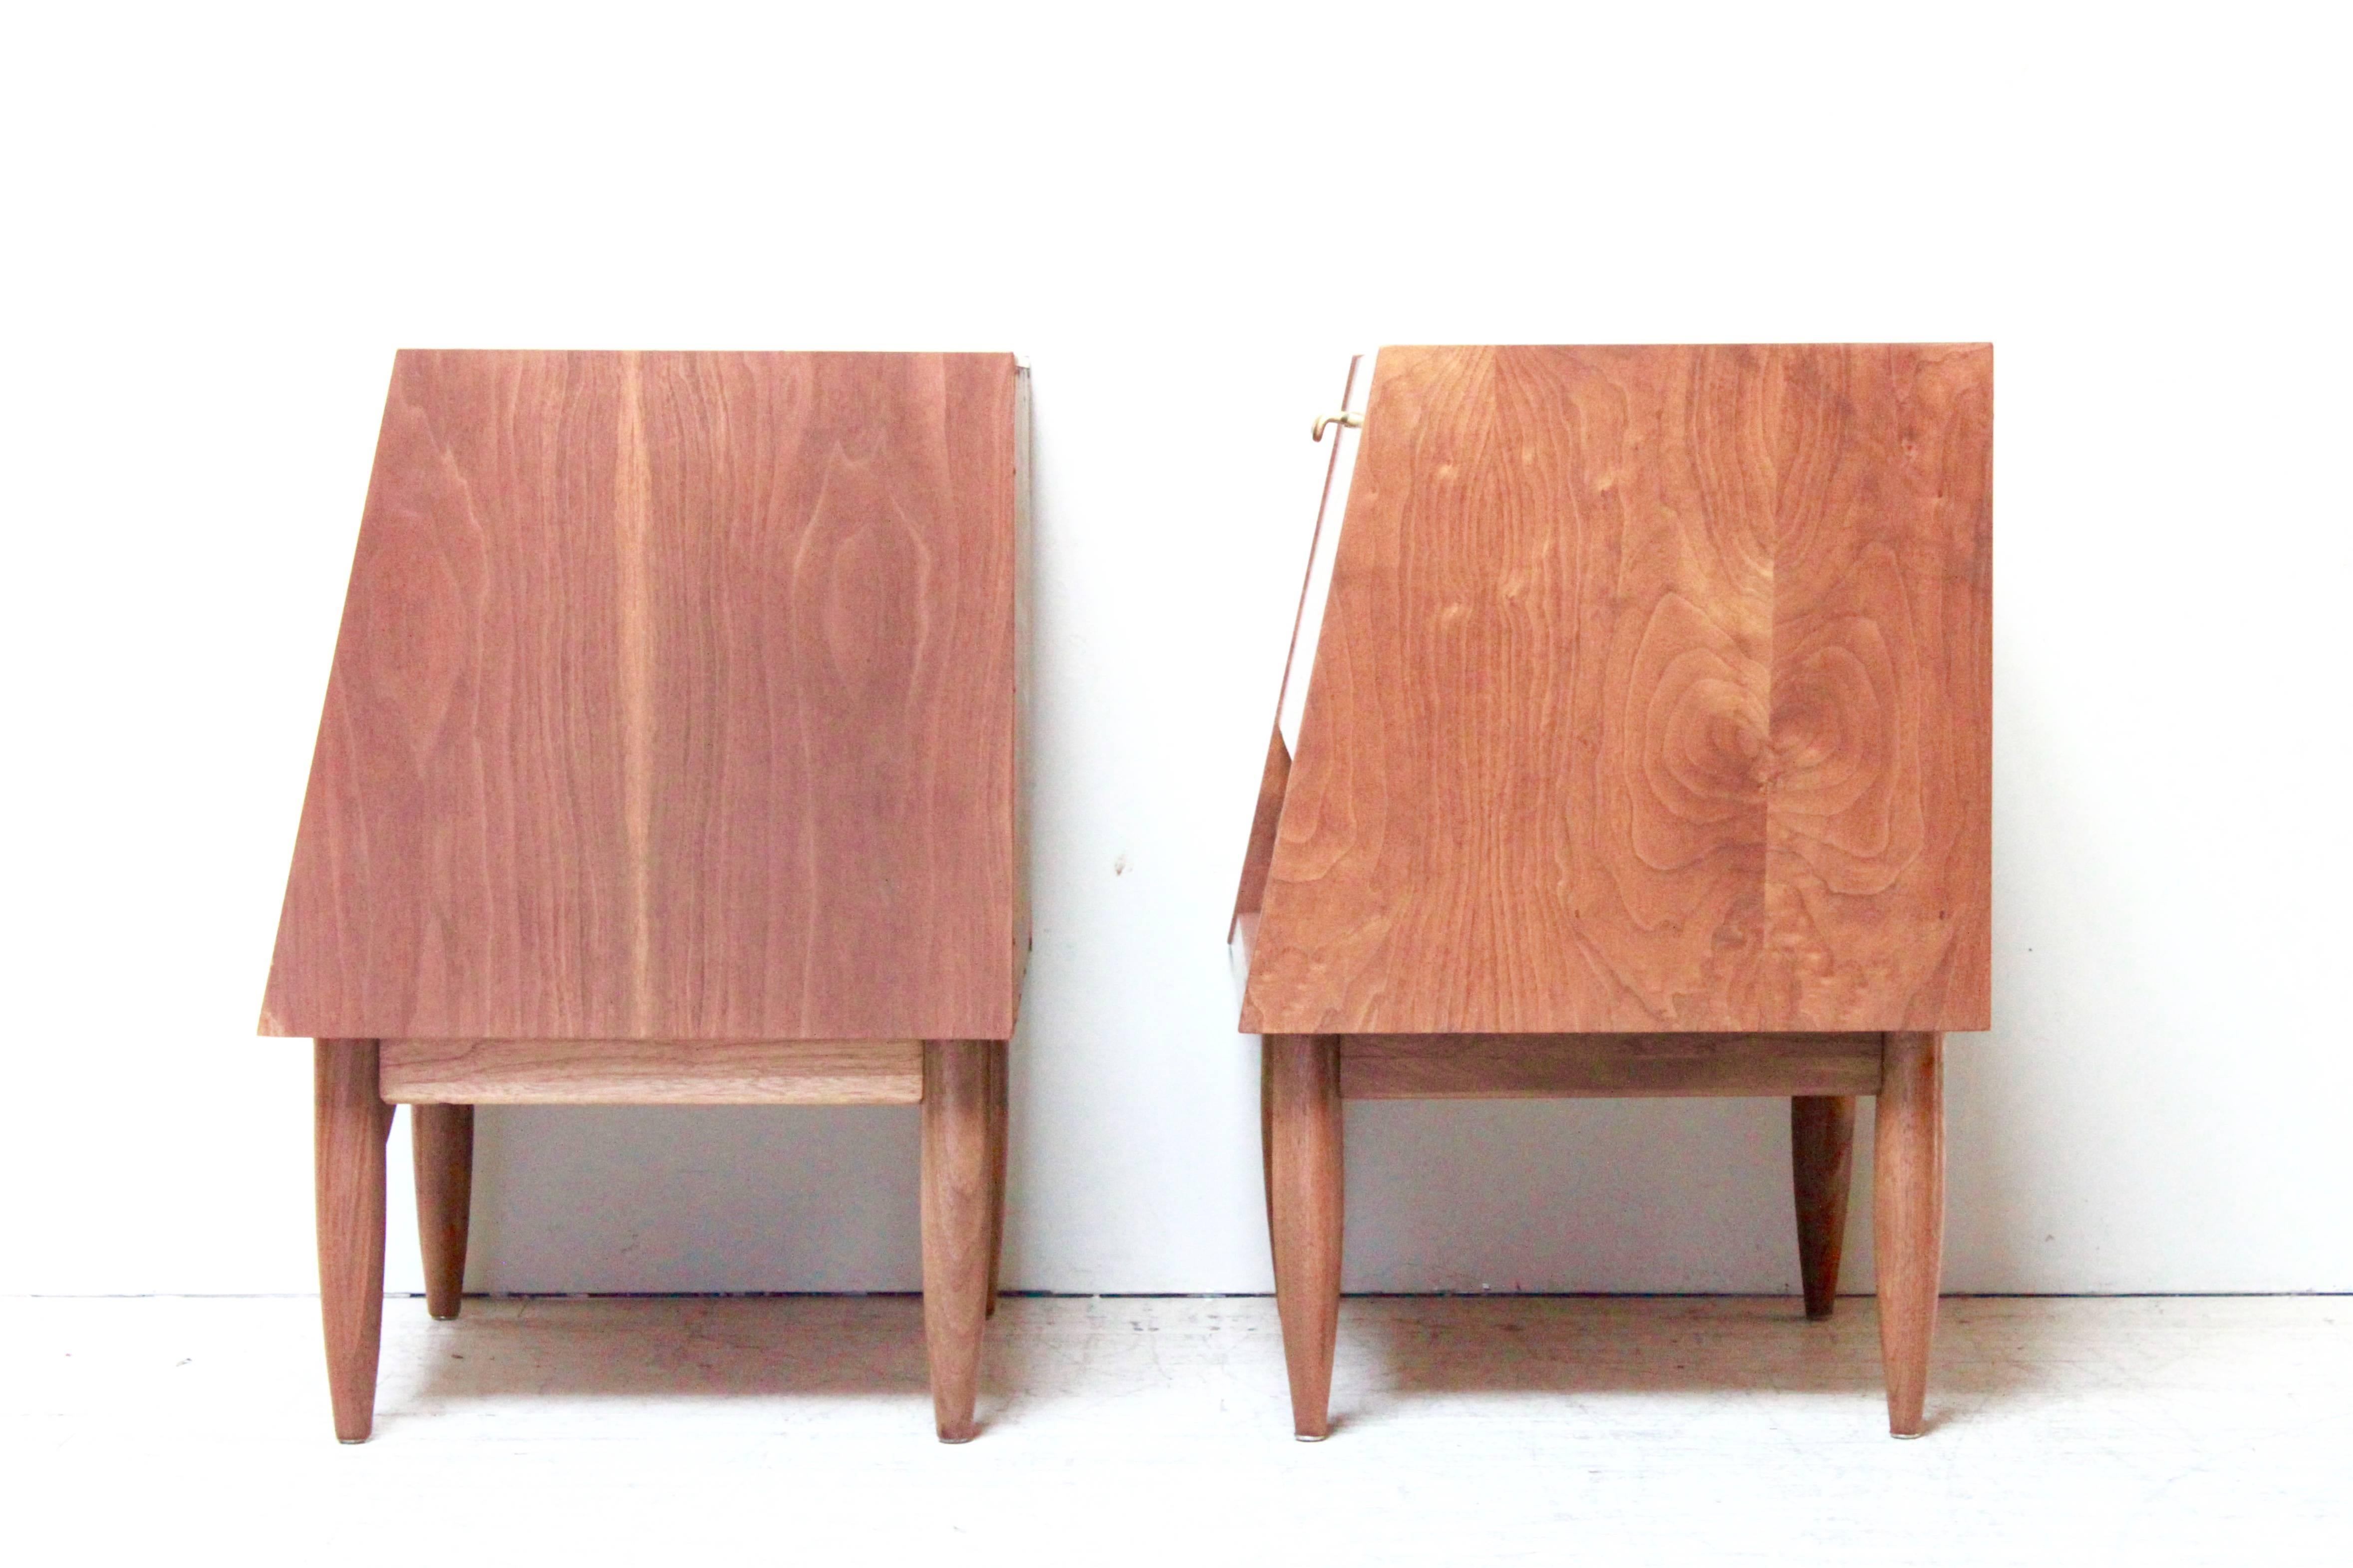 Beautiful restored Martinsville nightstands. Deep rich walnut grain fully envelope both nightstands. They feature brass door pulls. The interiors are also walnut with white laminate inside doors and white lacquer drawers. Designed by Merton Gershun